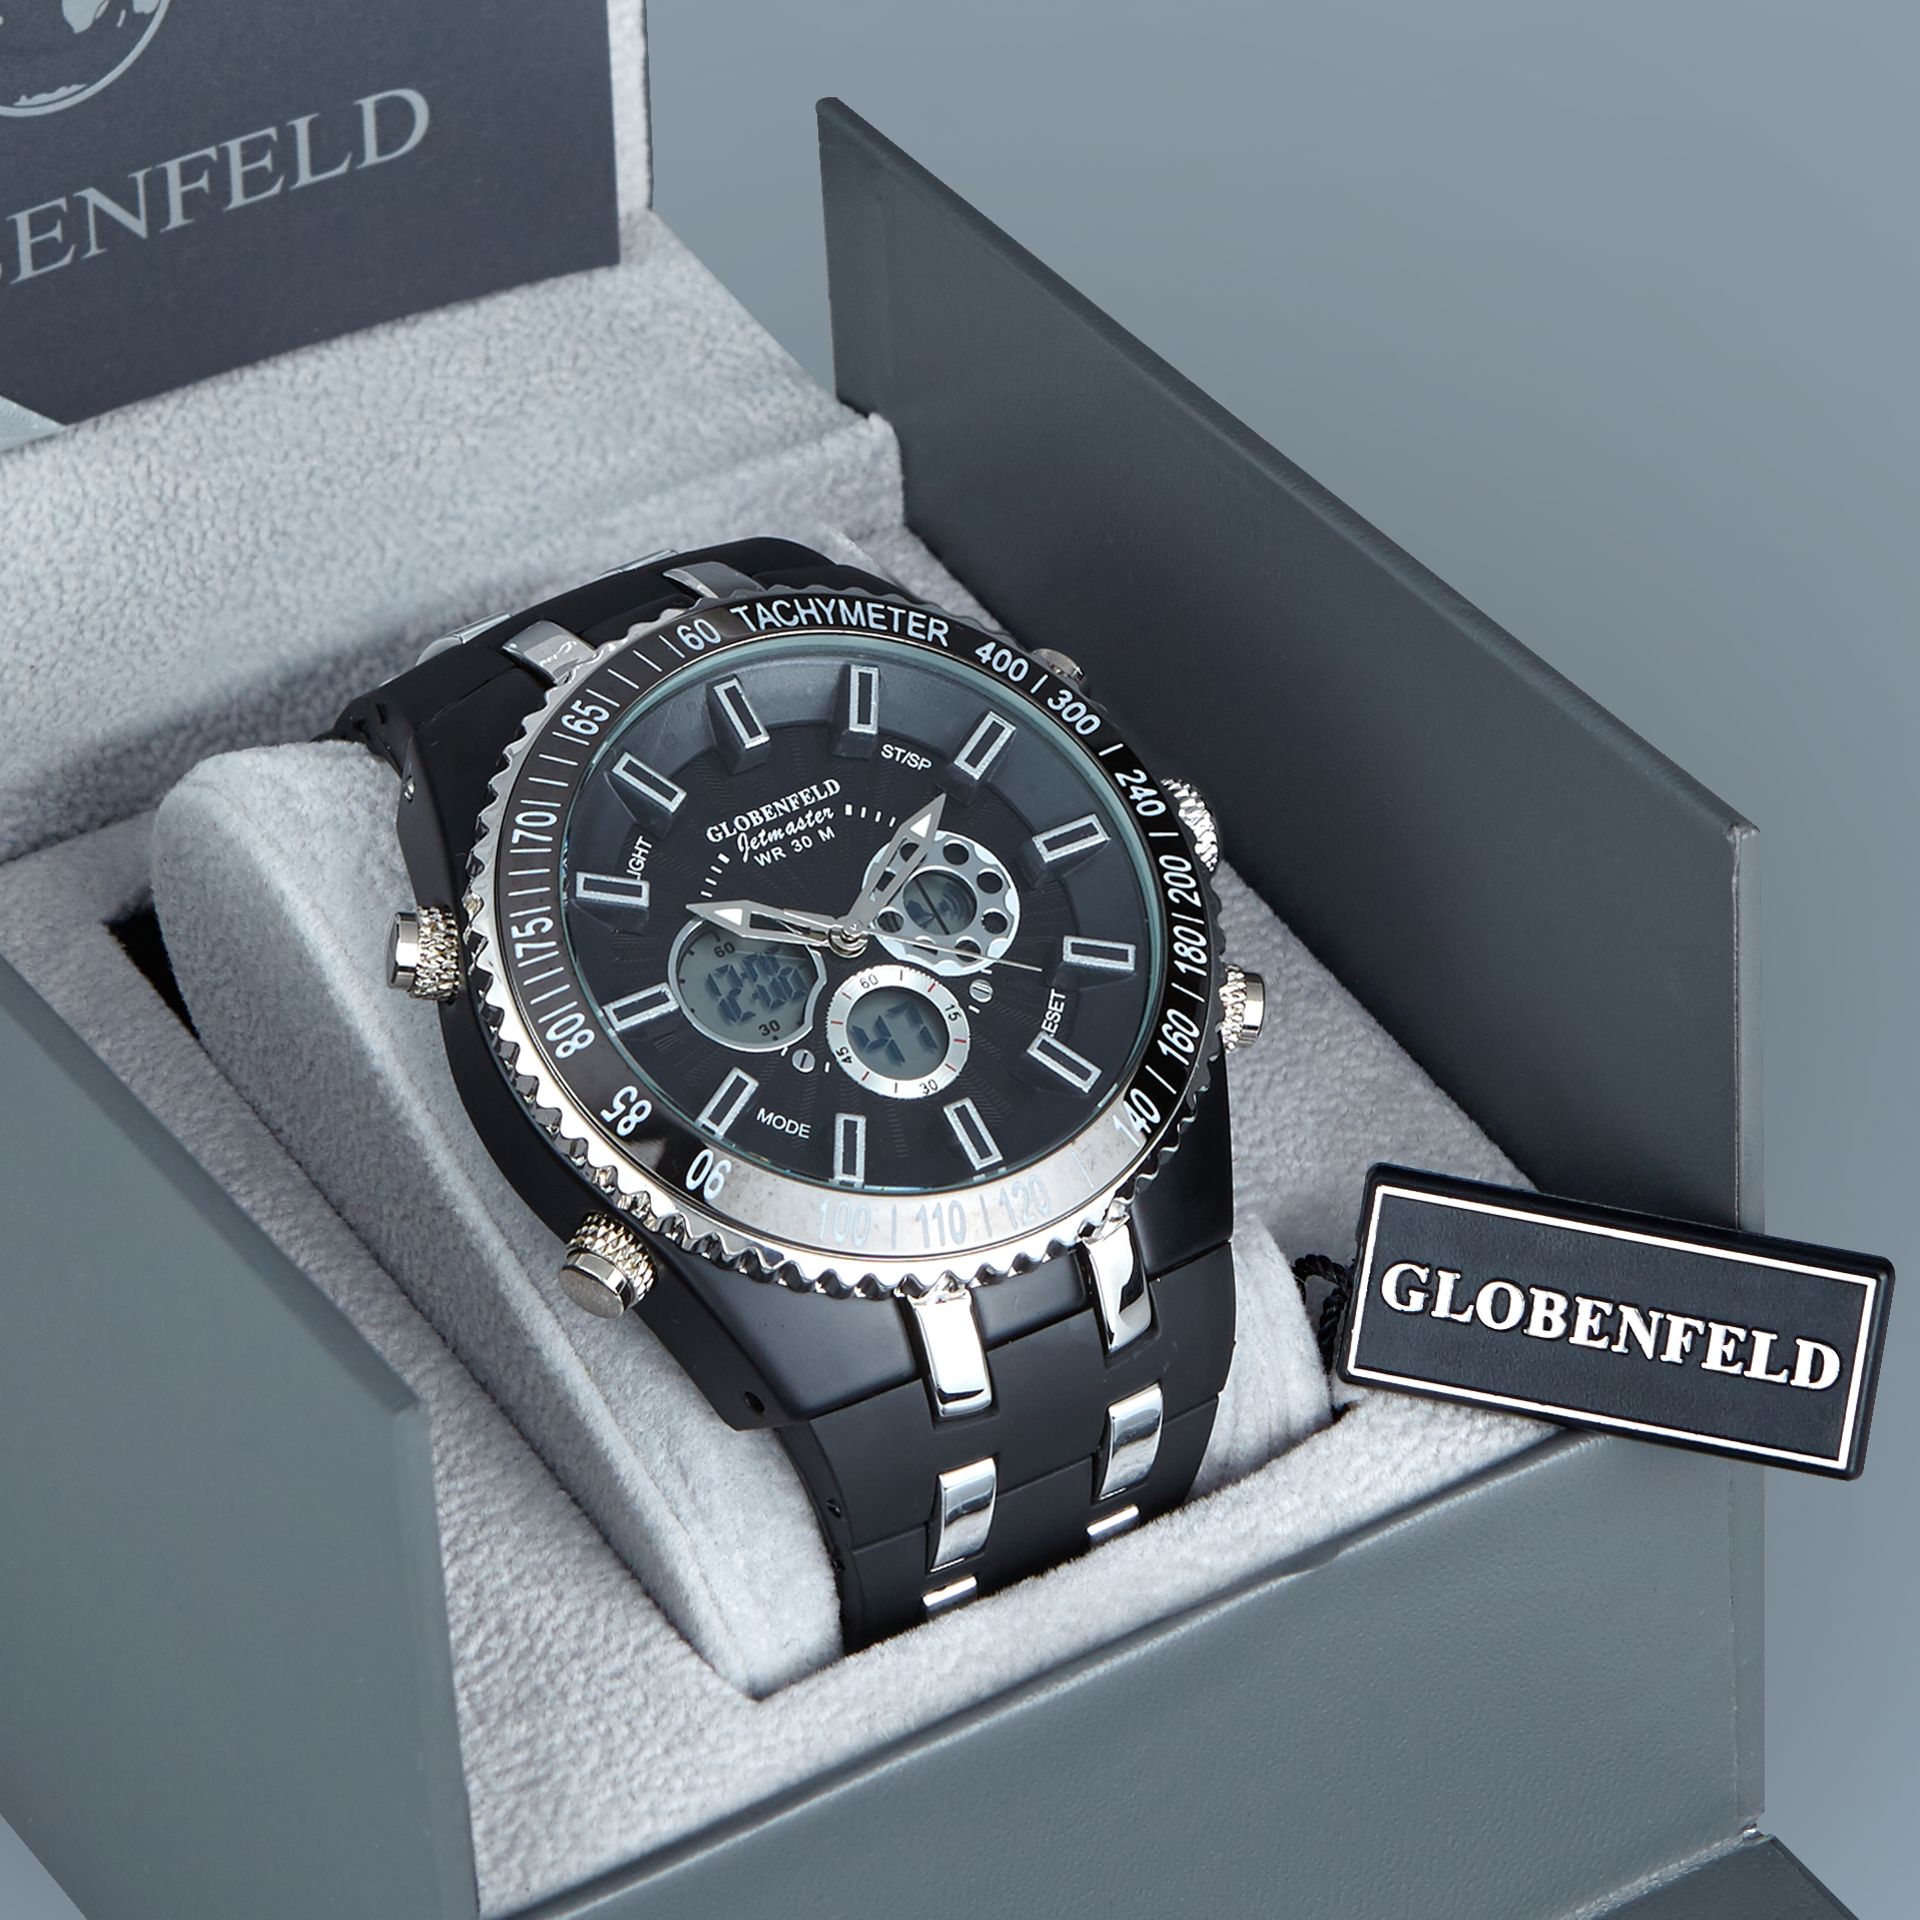 1 BRAND NEW BOXED GLOBENFELD JETMASTER WATCH IN BLACK RRP £199.99 COMES WITH 5 YEAR WARRANTY